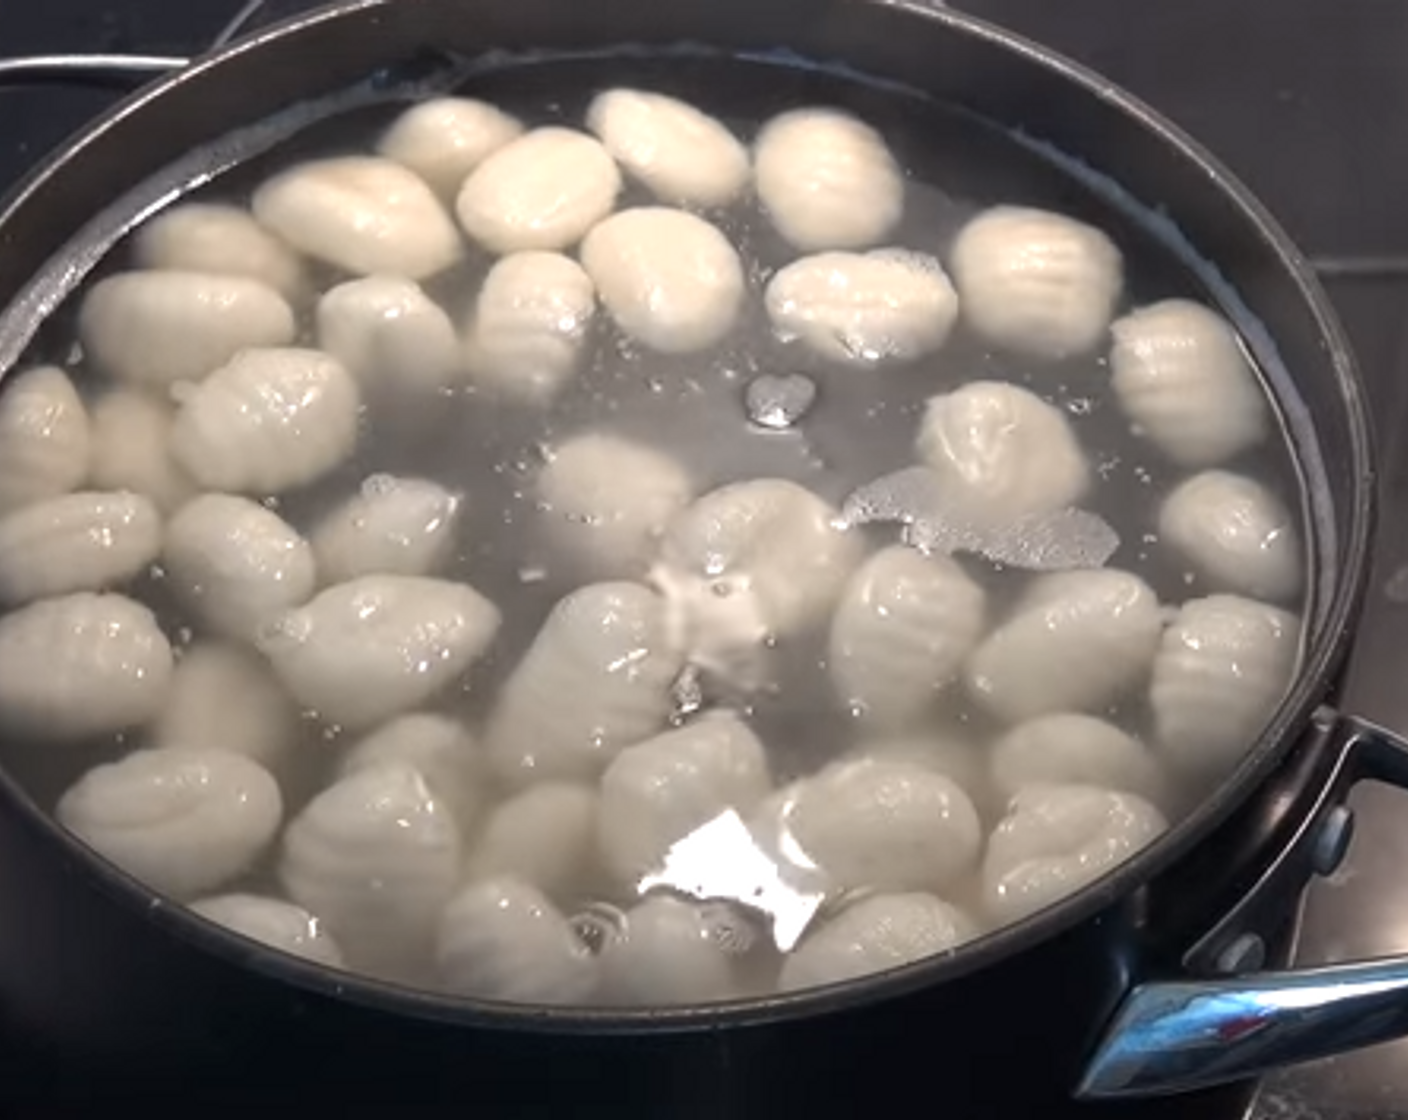 step 1 Boil a pot of water. When bubbling, carefully add Gnocchi (1.1 lb). When the gnocchi bob to the surface, they're done and you can scoop them out with a slotted spoon. Drain on a paper towel.